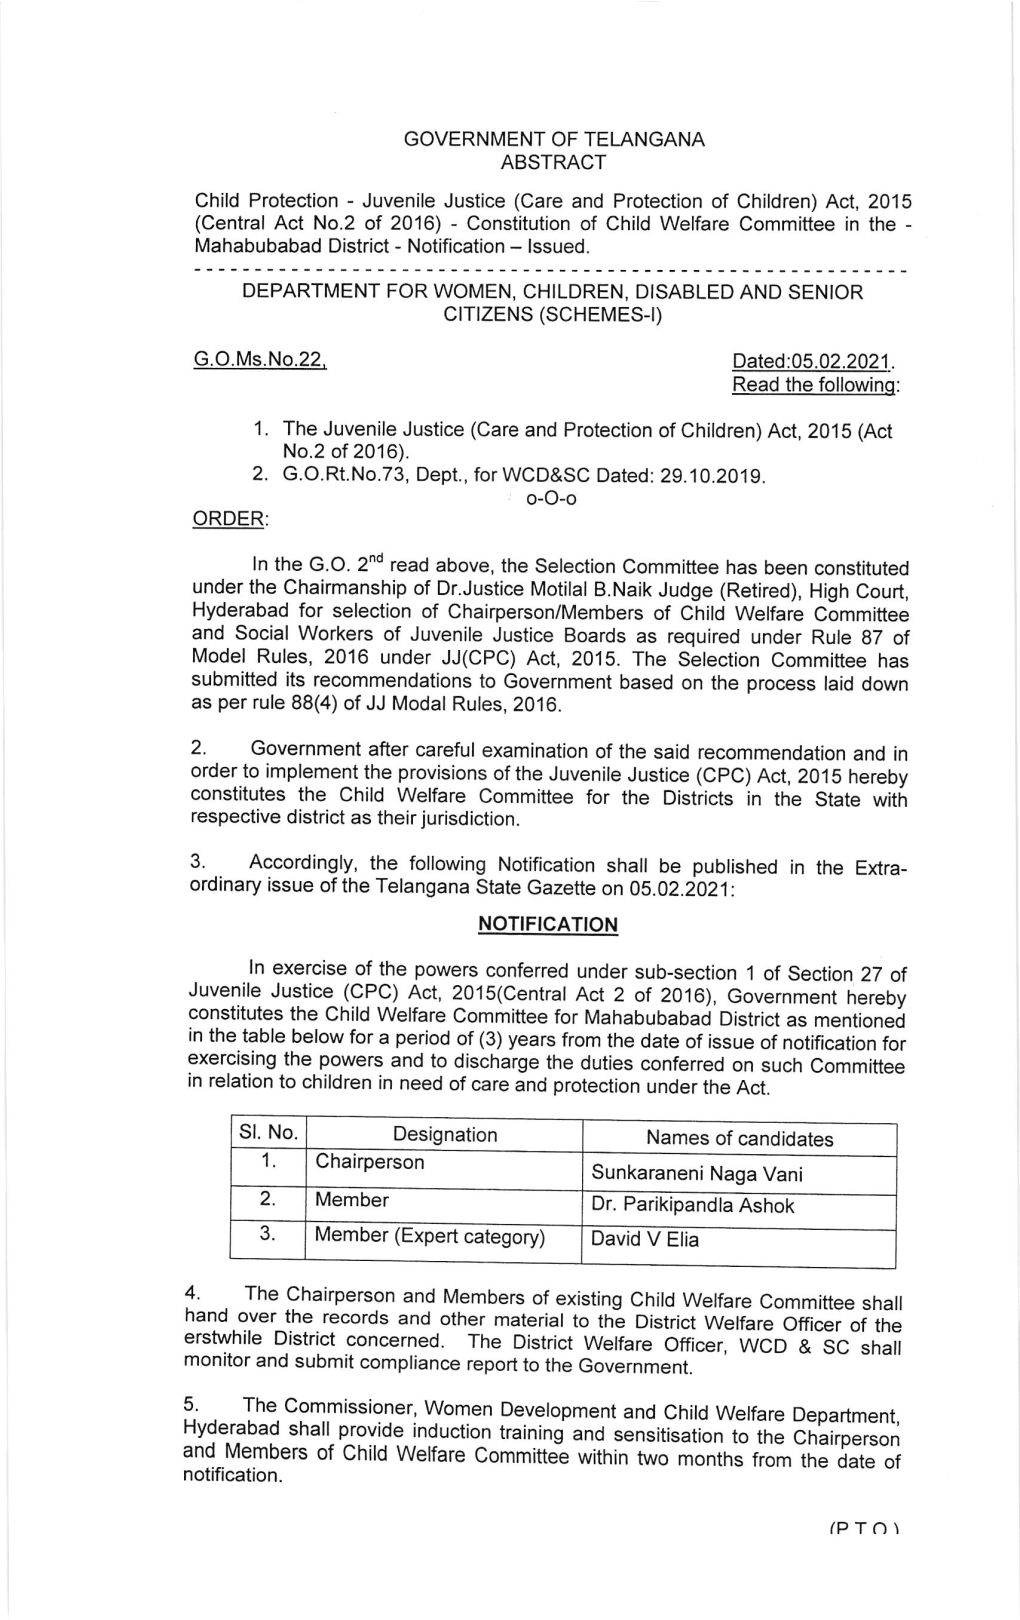 Constitutes the Child Welfare Committee for the Districts in the State with Respective District As Their Jurisdiction